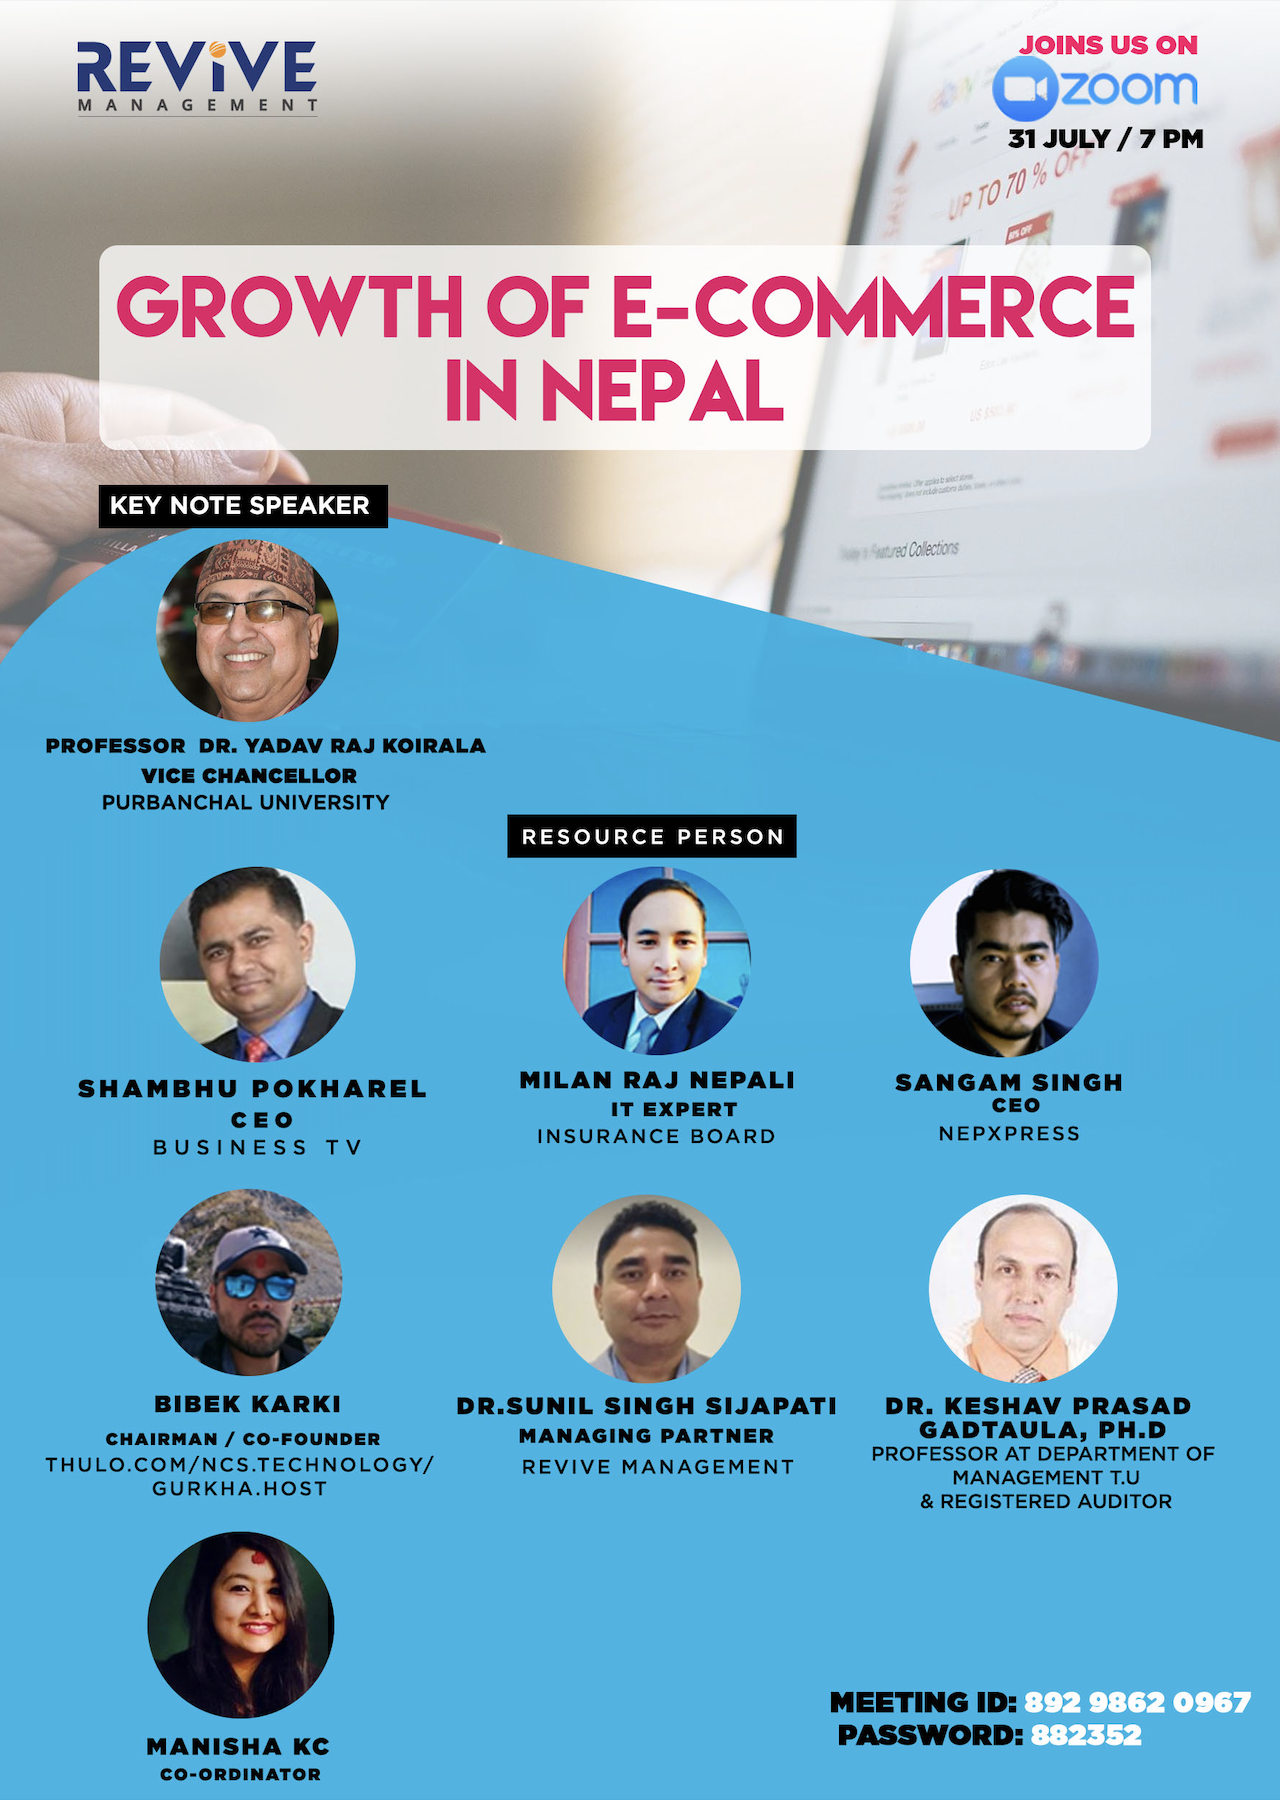 Growth Of E-commerce in Nepal